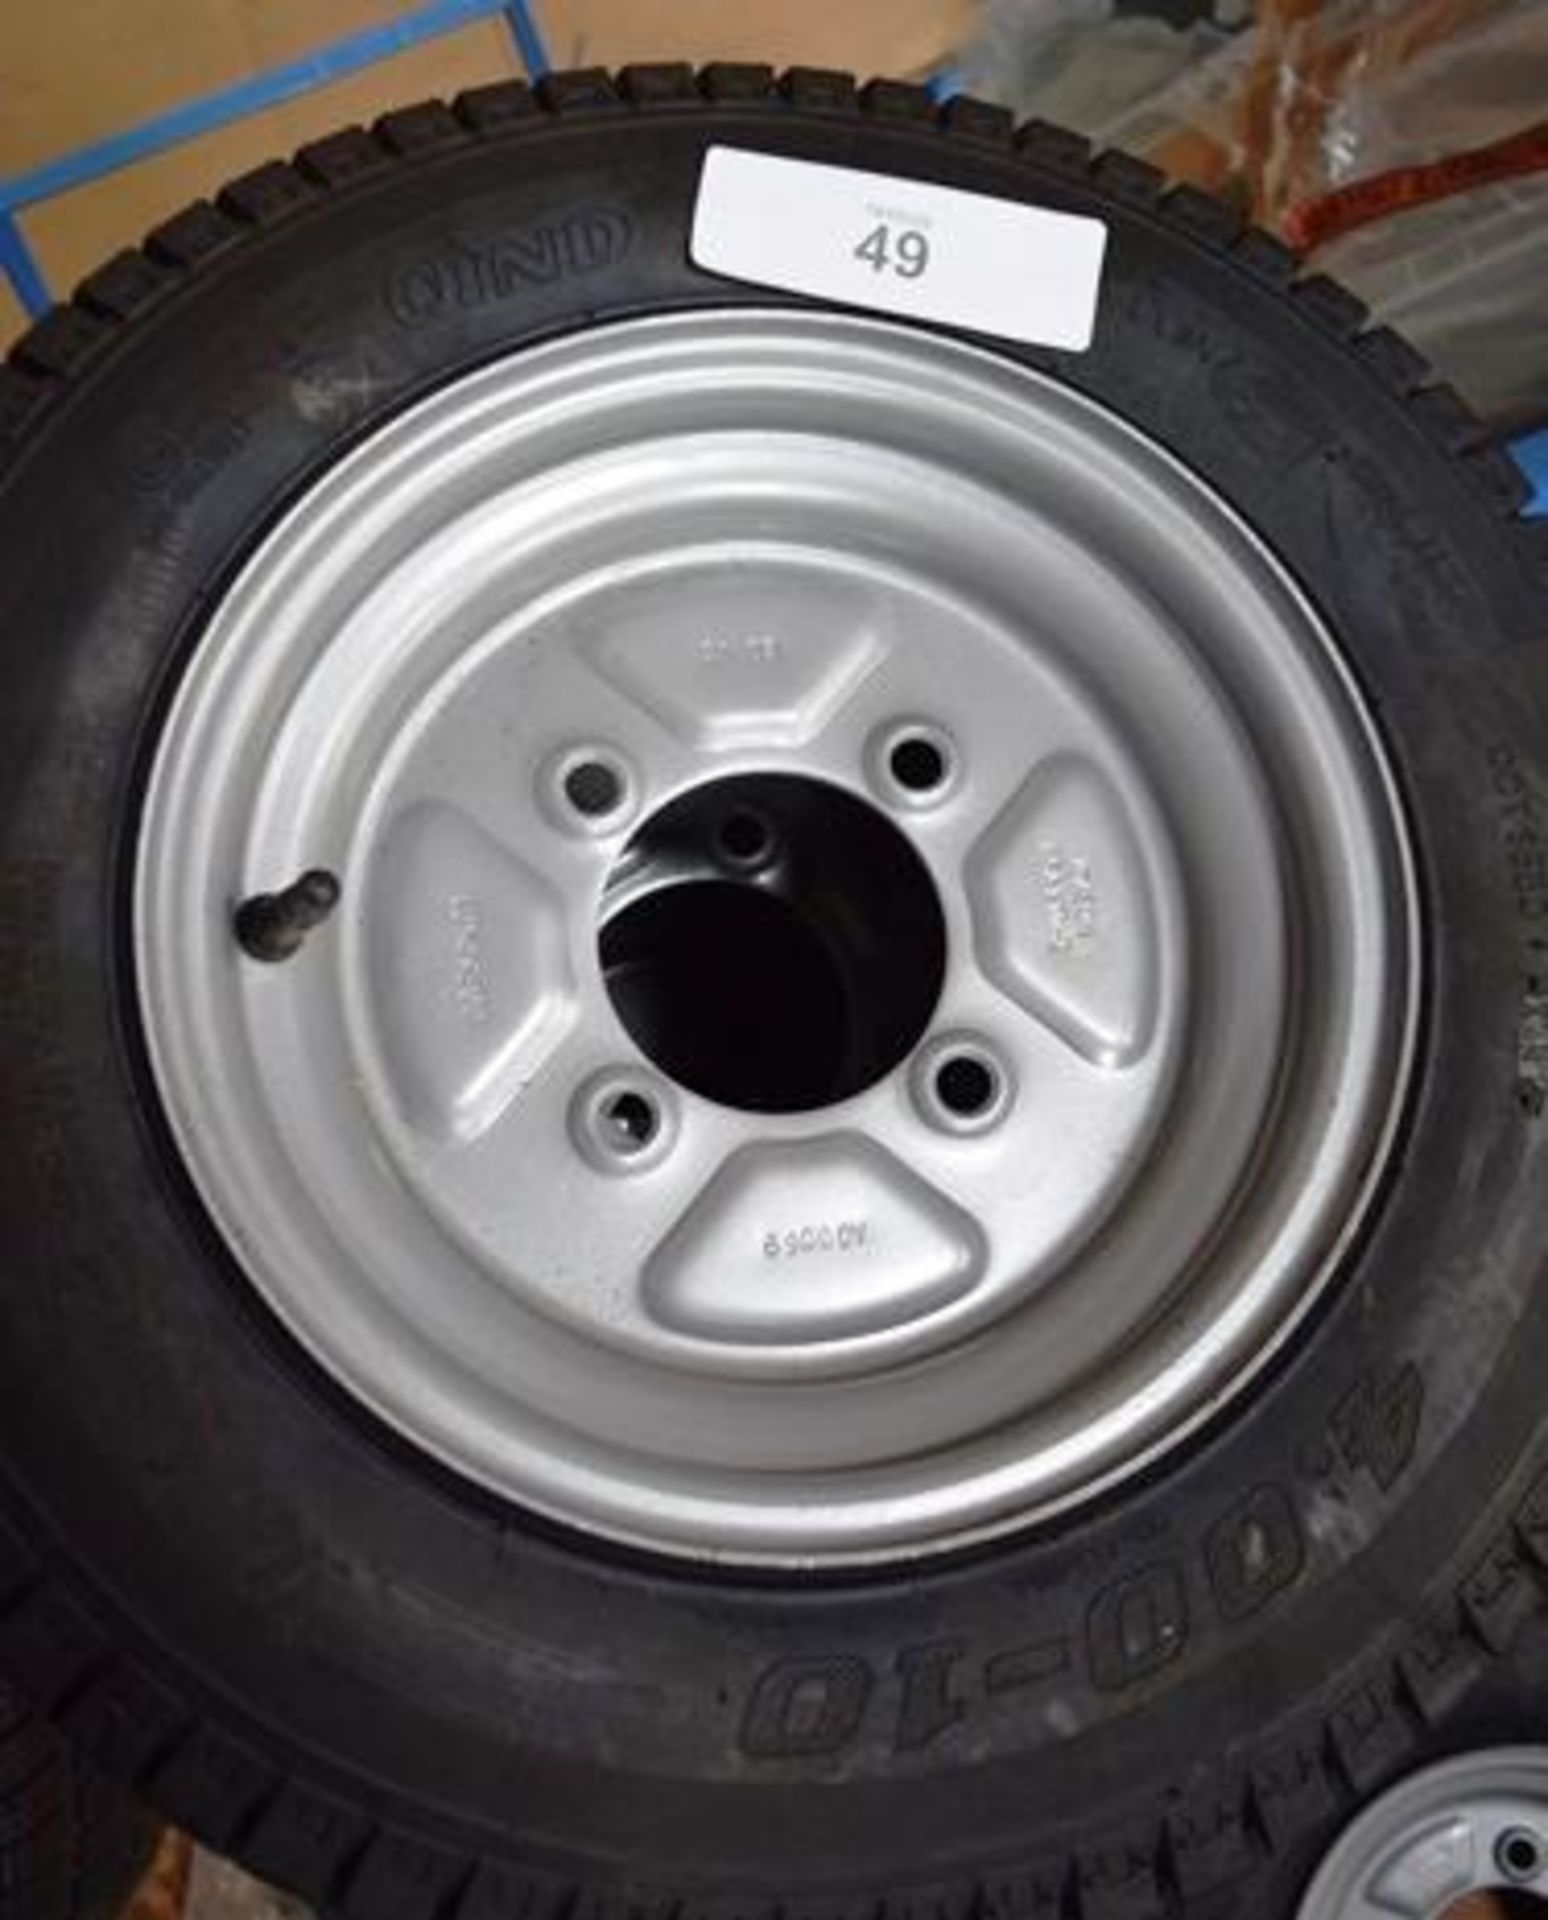 3 x Qind tyres, size 4.00 x 10" with fitted metal 4 stud hubs and 1 x Wanda 4 tyre, size 4.80/4.00-8